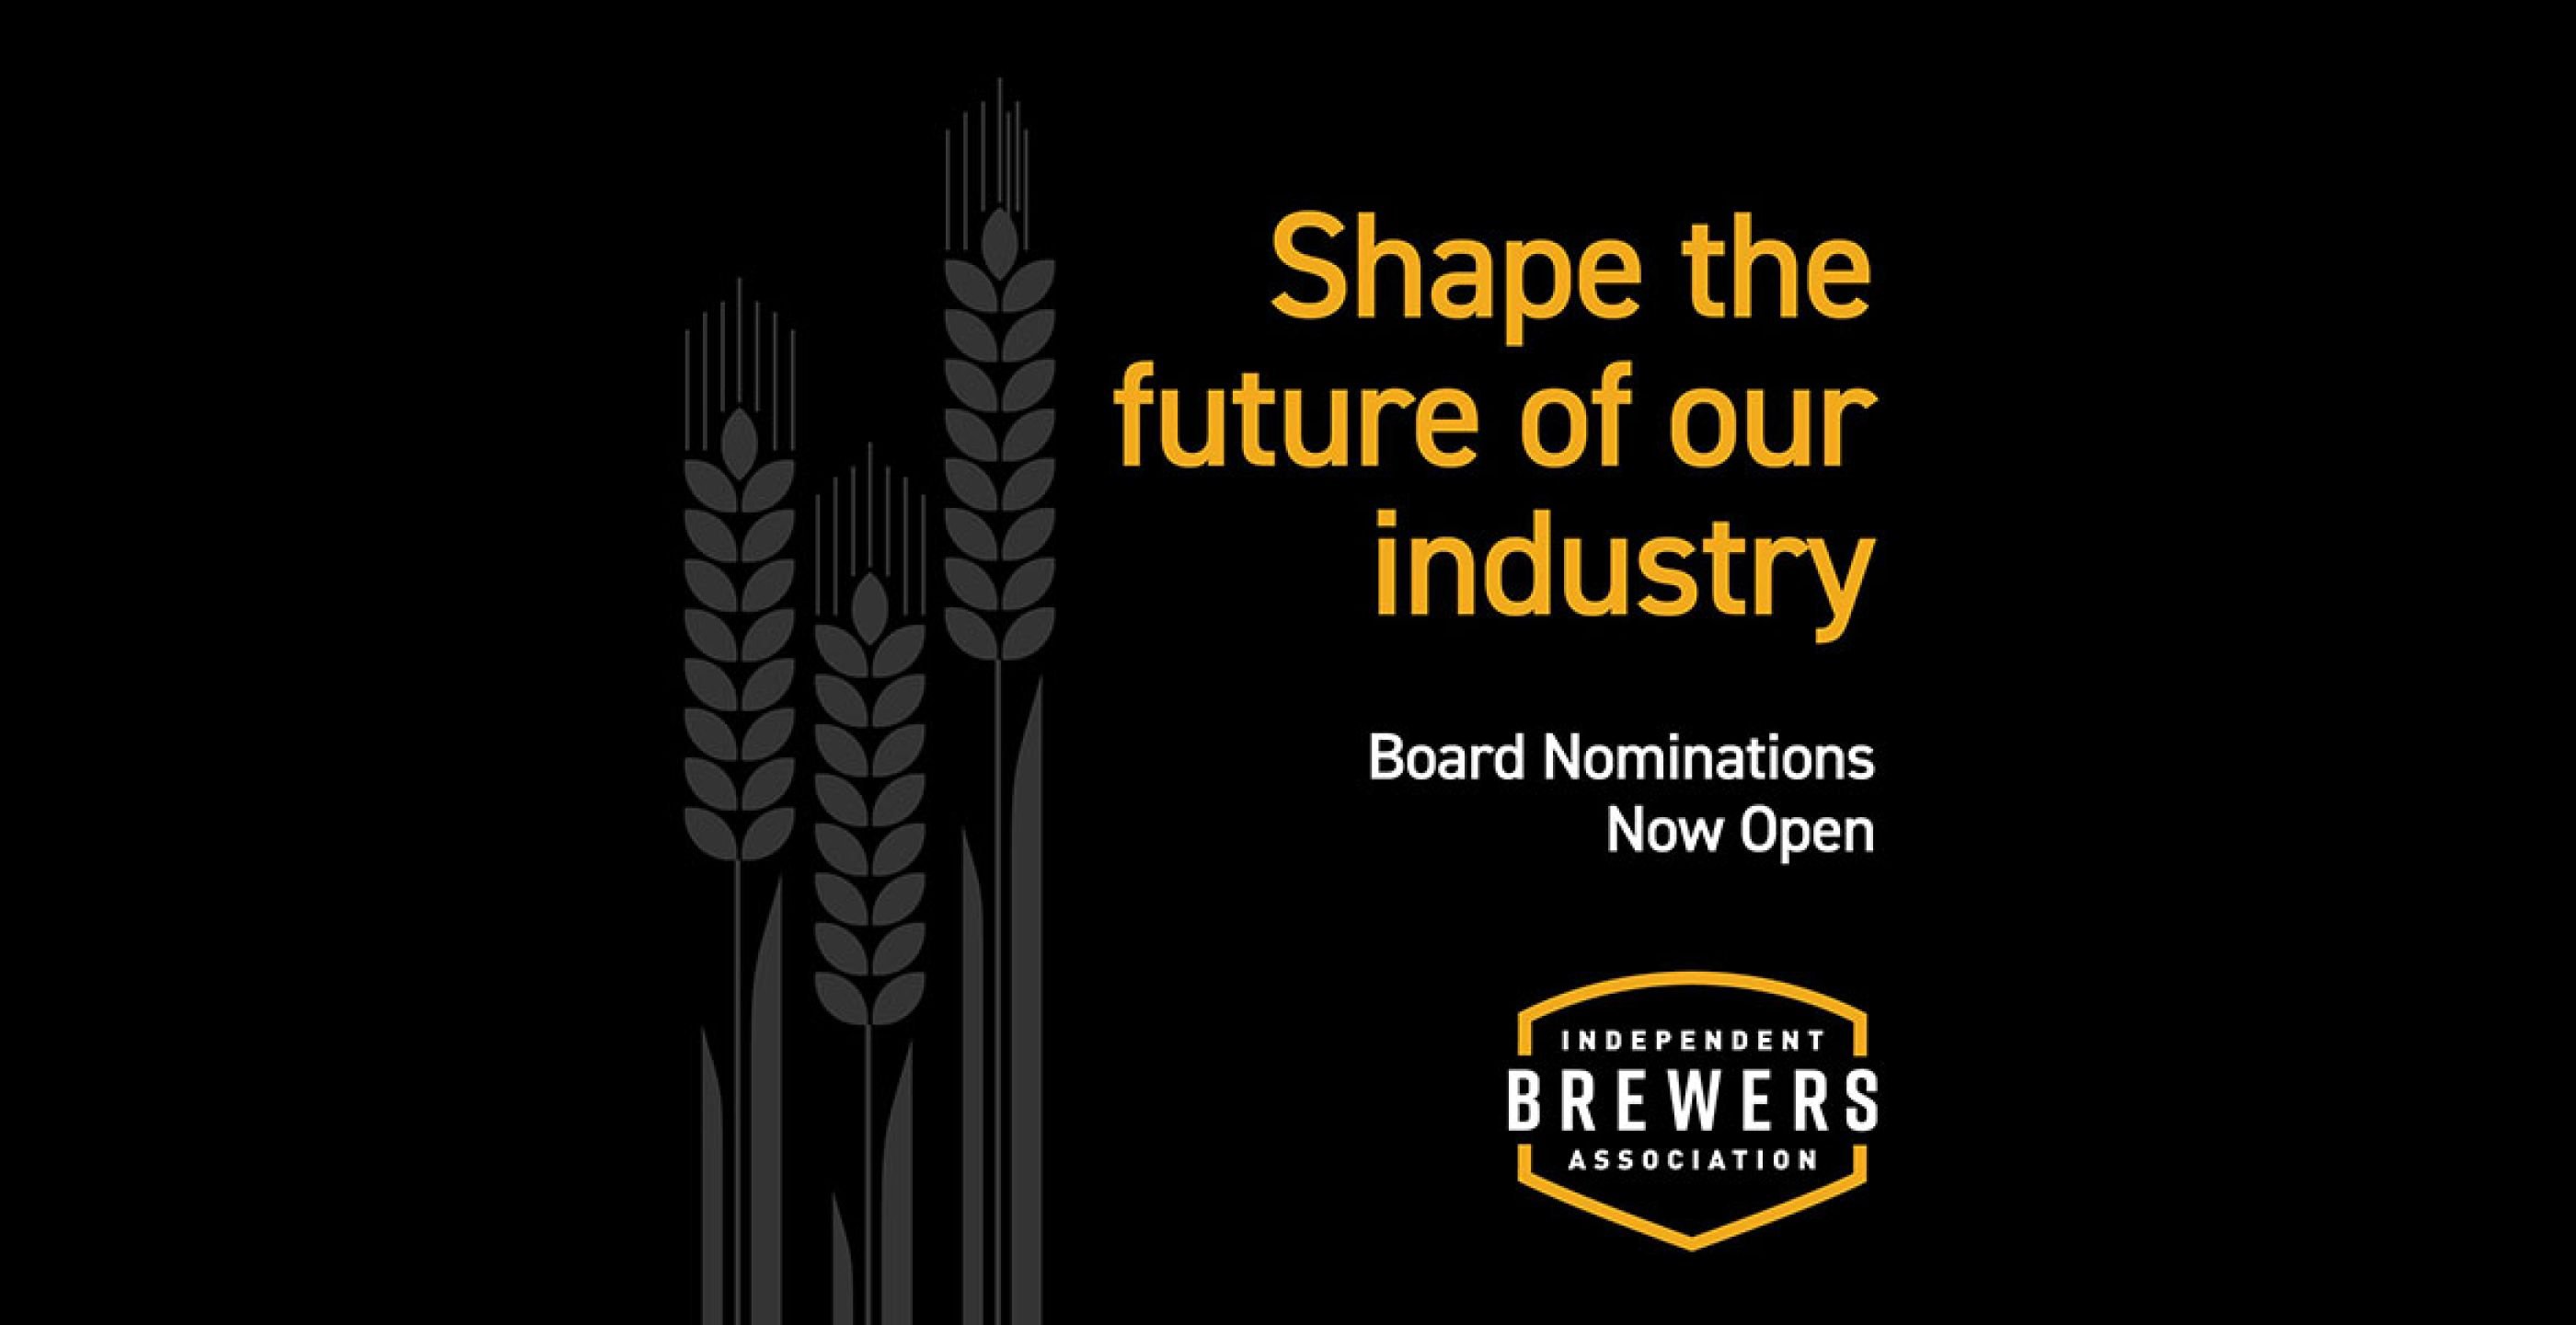 IBA Board Nominations Are Now Open